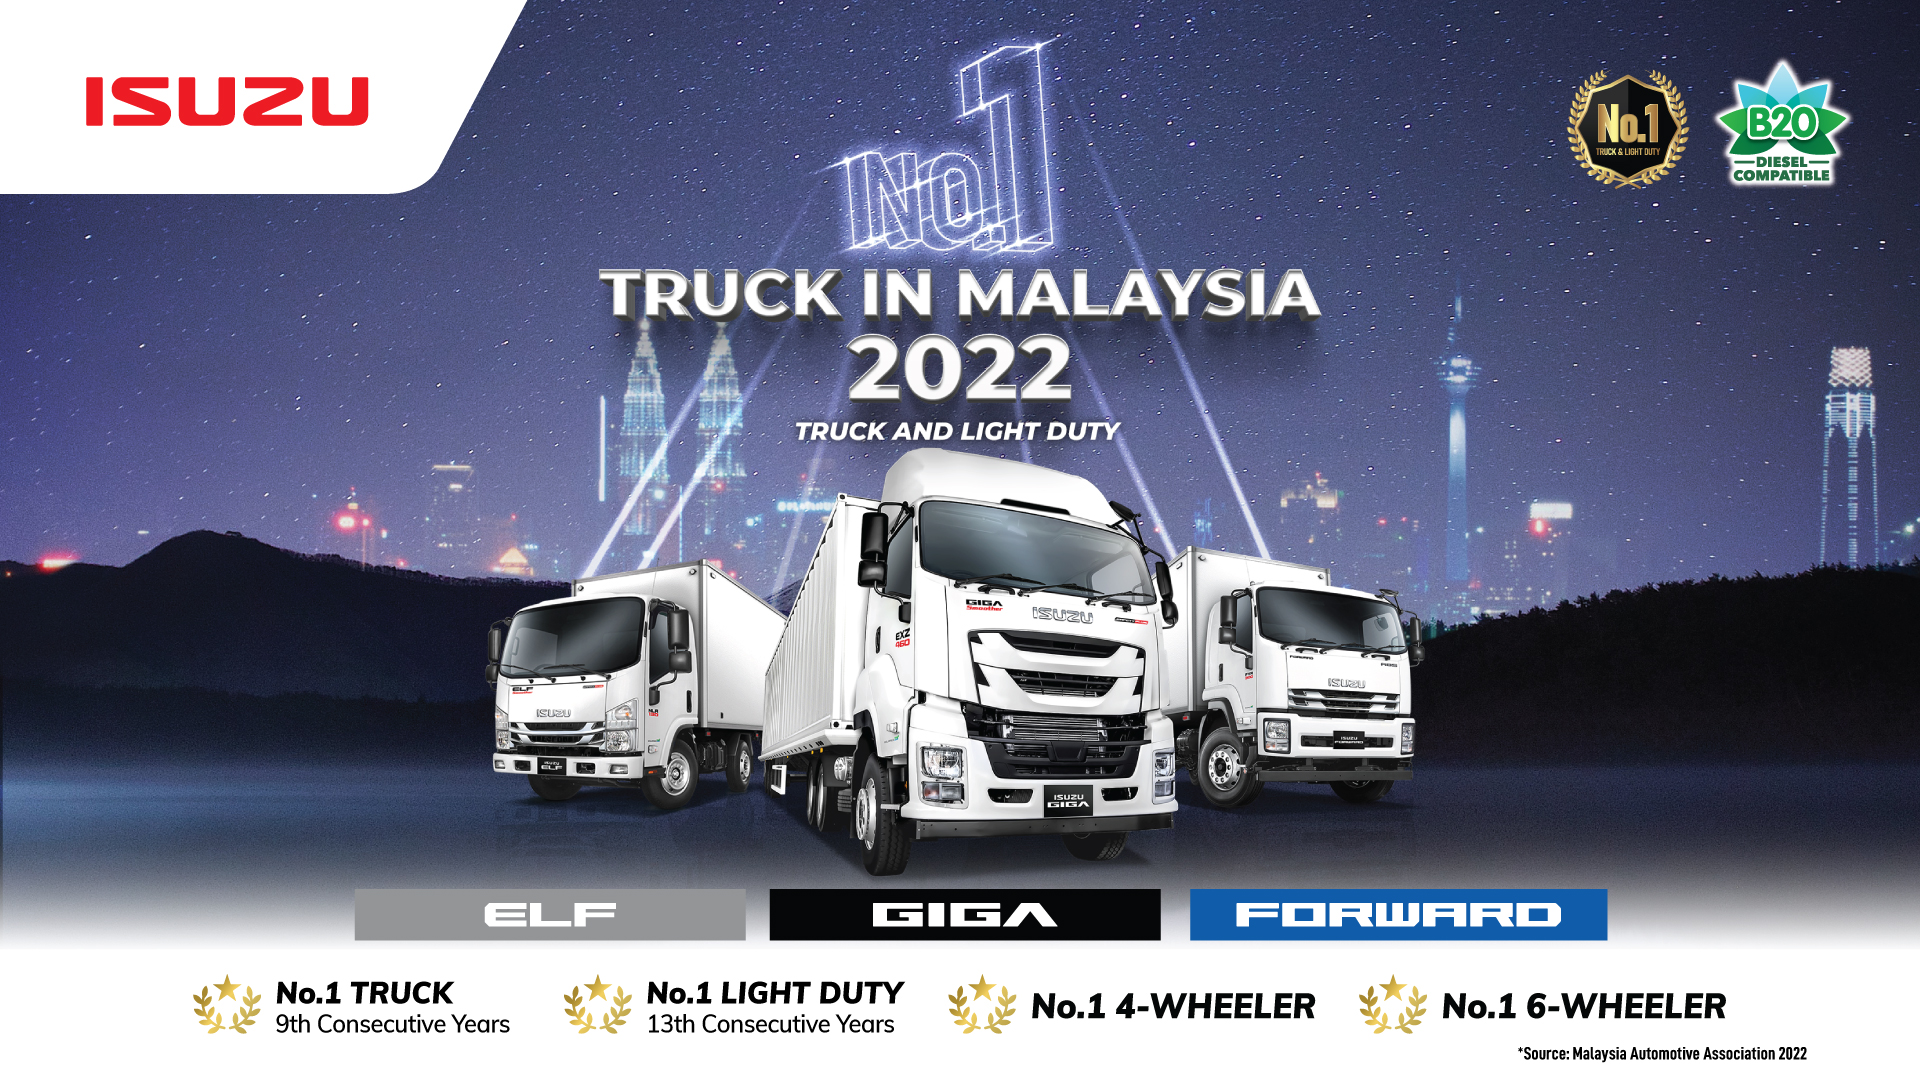 ISUZU TAKES TOP SPOT AS MALAYSIA’S MOST FAVOURED TRUCK AND LIGHT-DUTY TRUCK BRAND FOR 2022